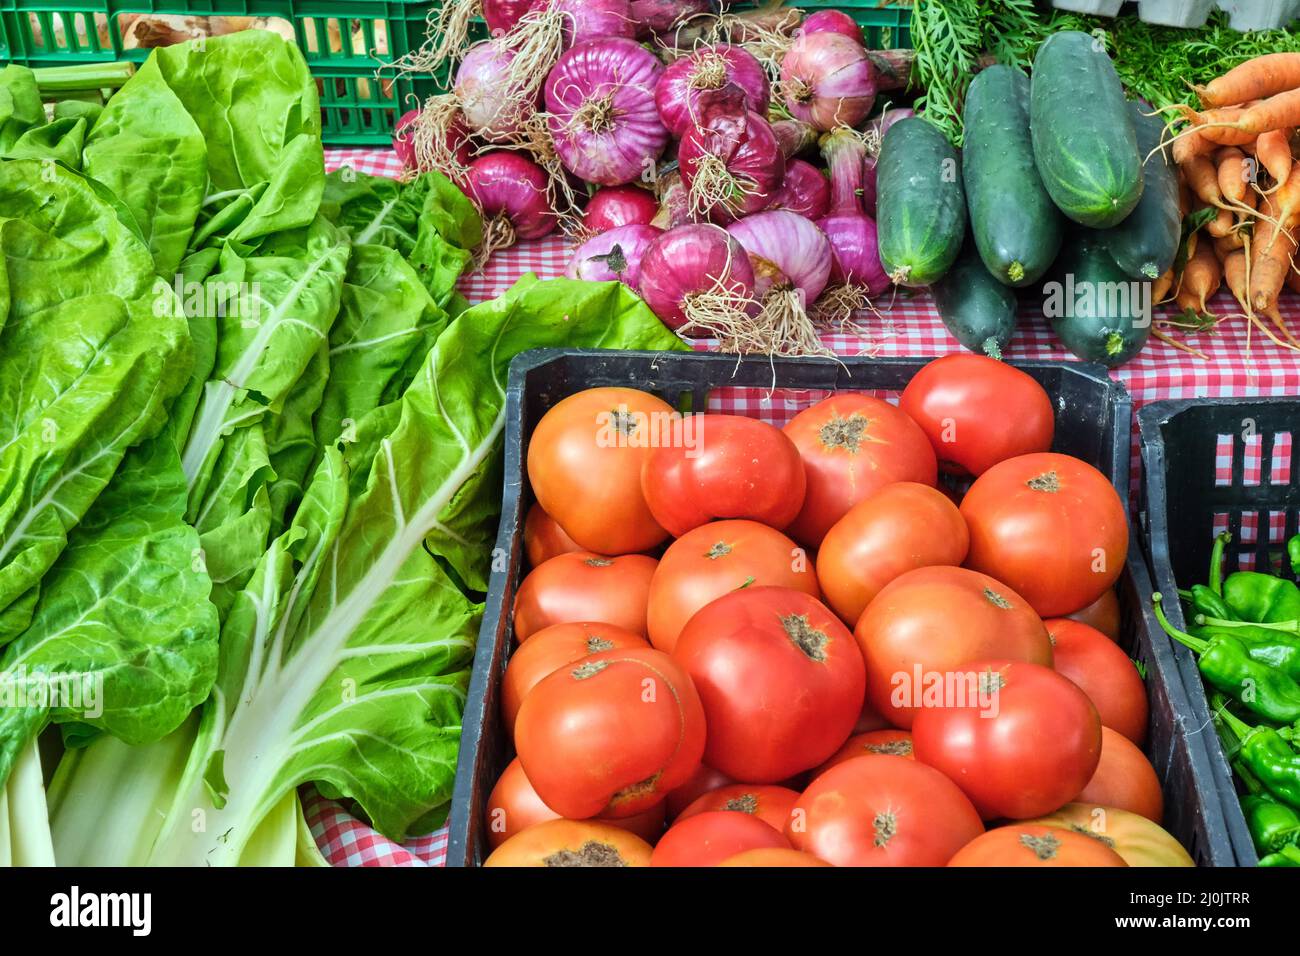 Tomatoes and salad for sale at a market Stock Photo